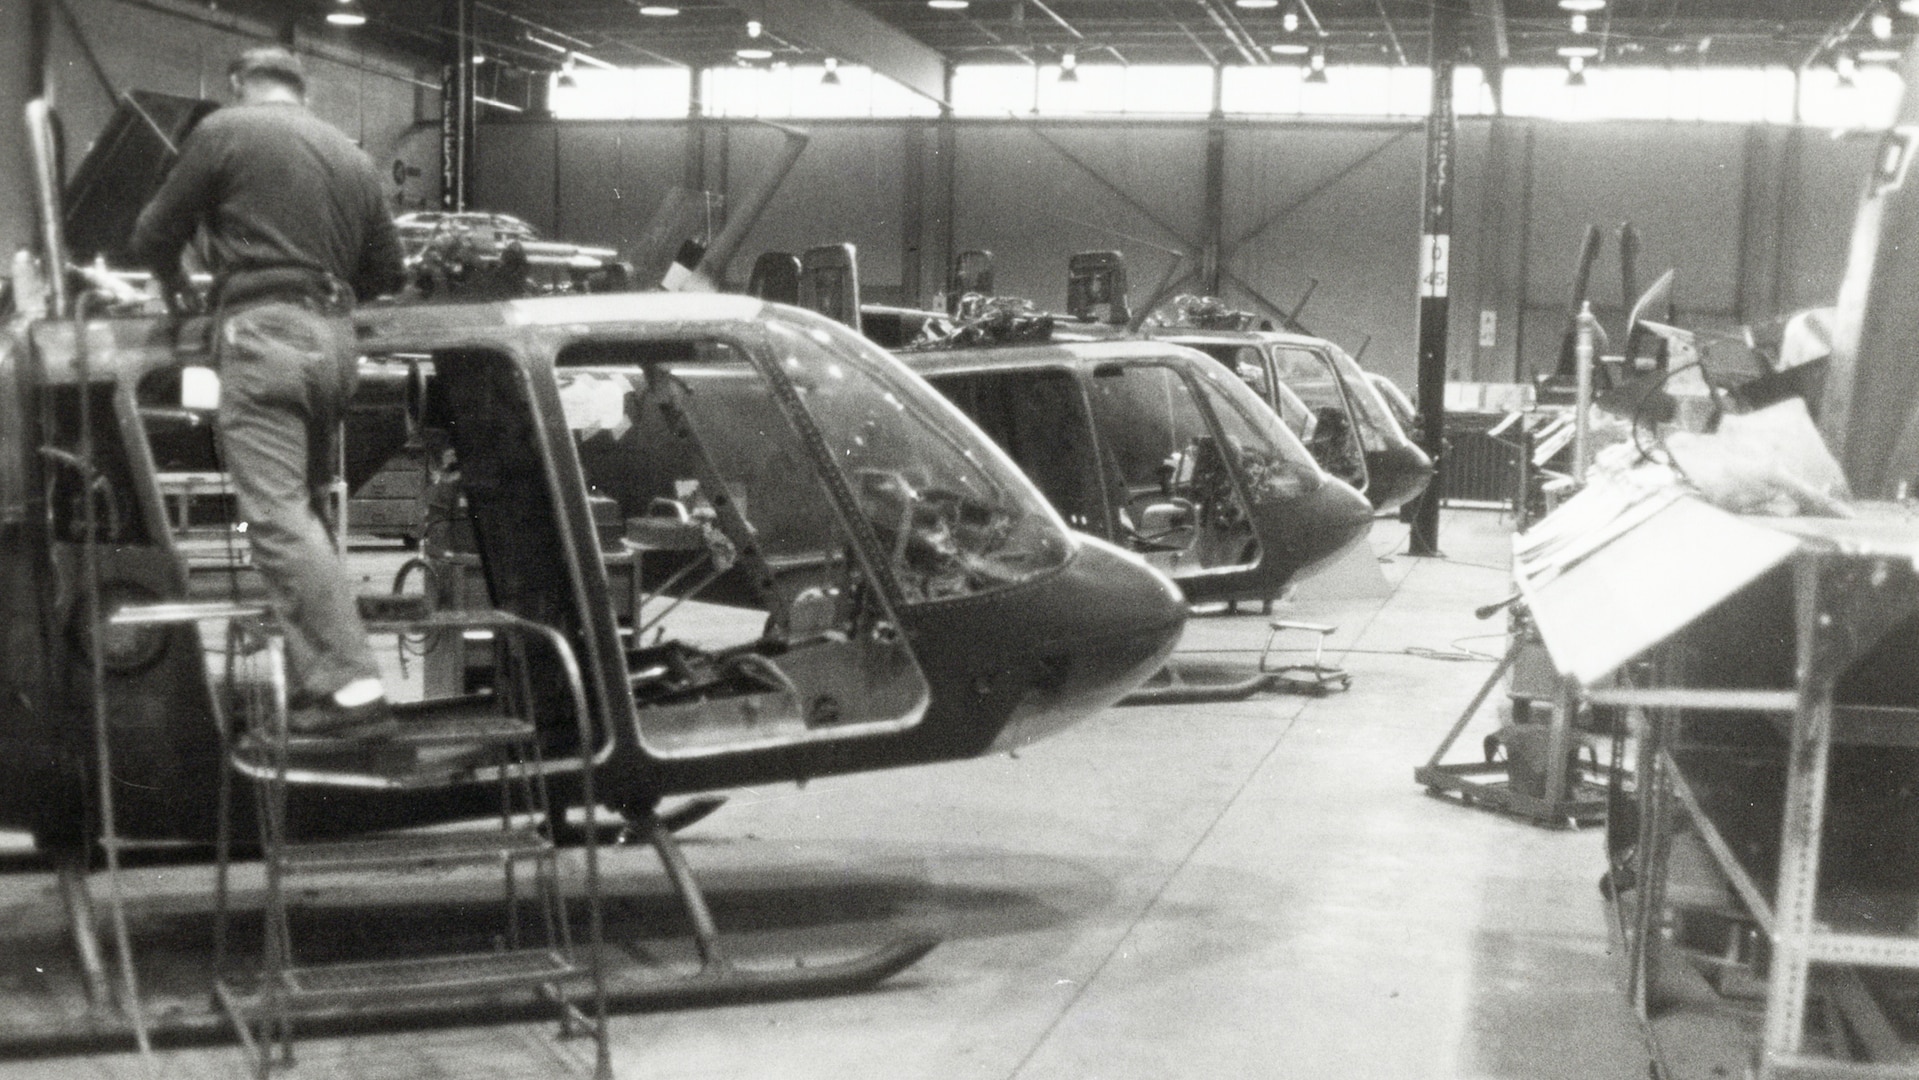 Black and white photos of helicopters in an assembly line